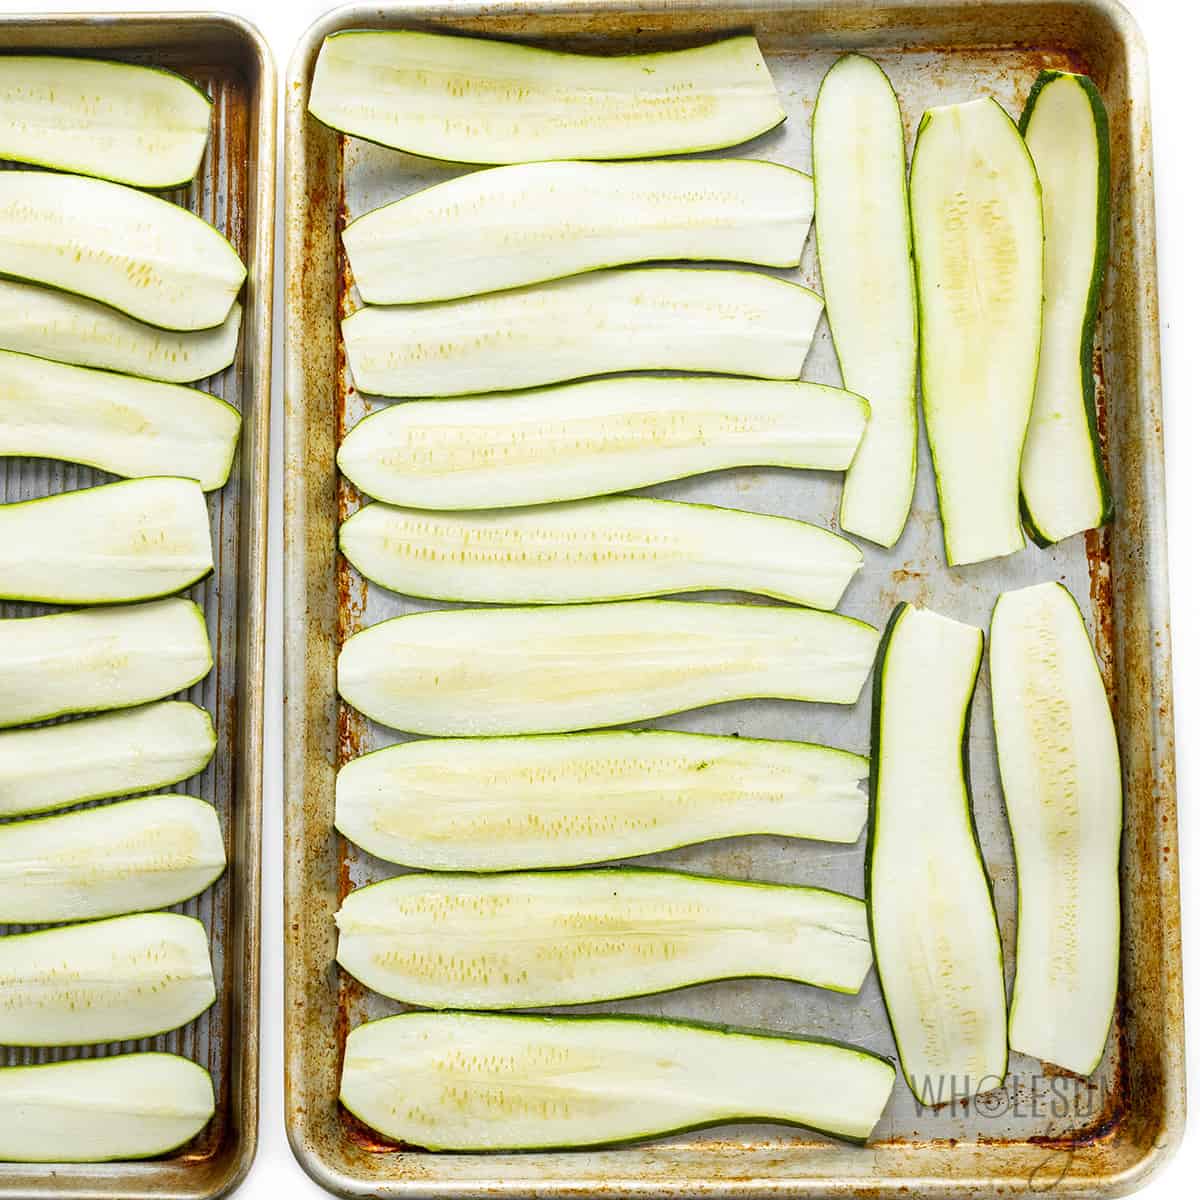 The zucchini strips are placed on the baking sheet.